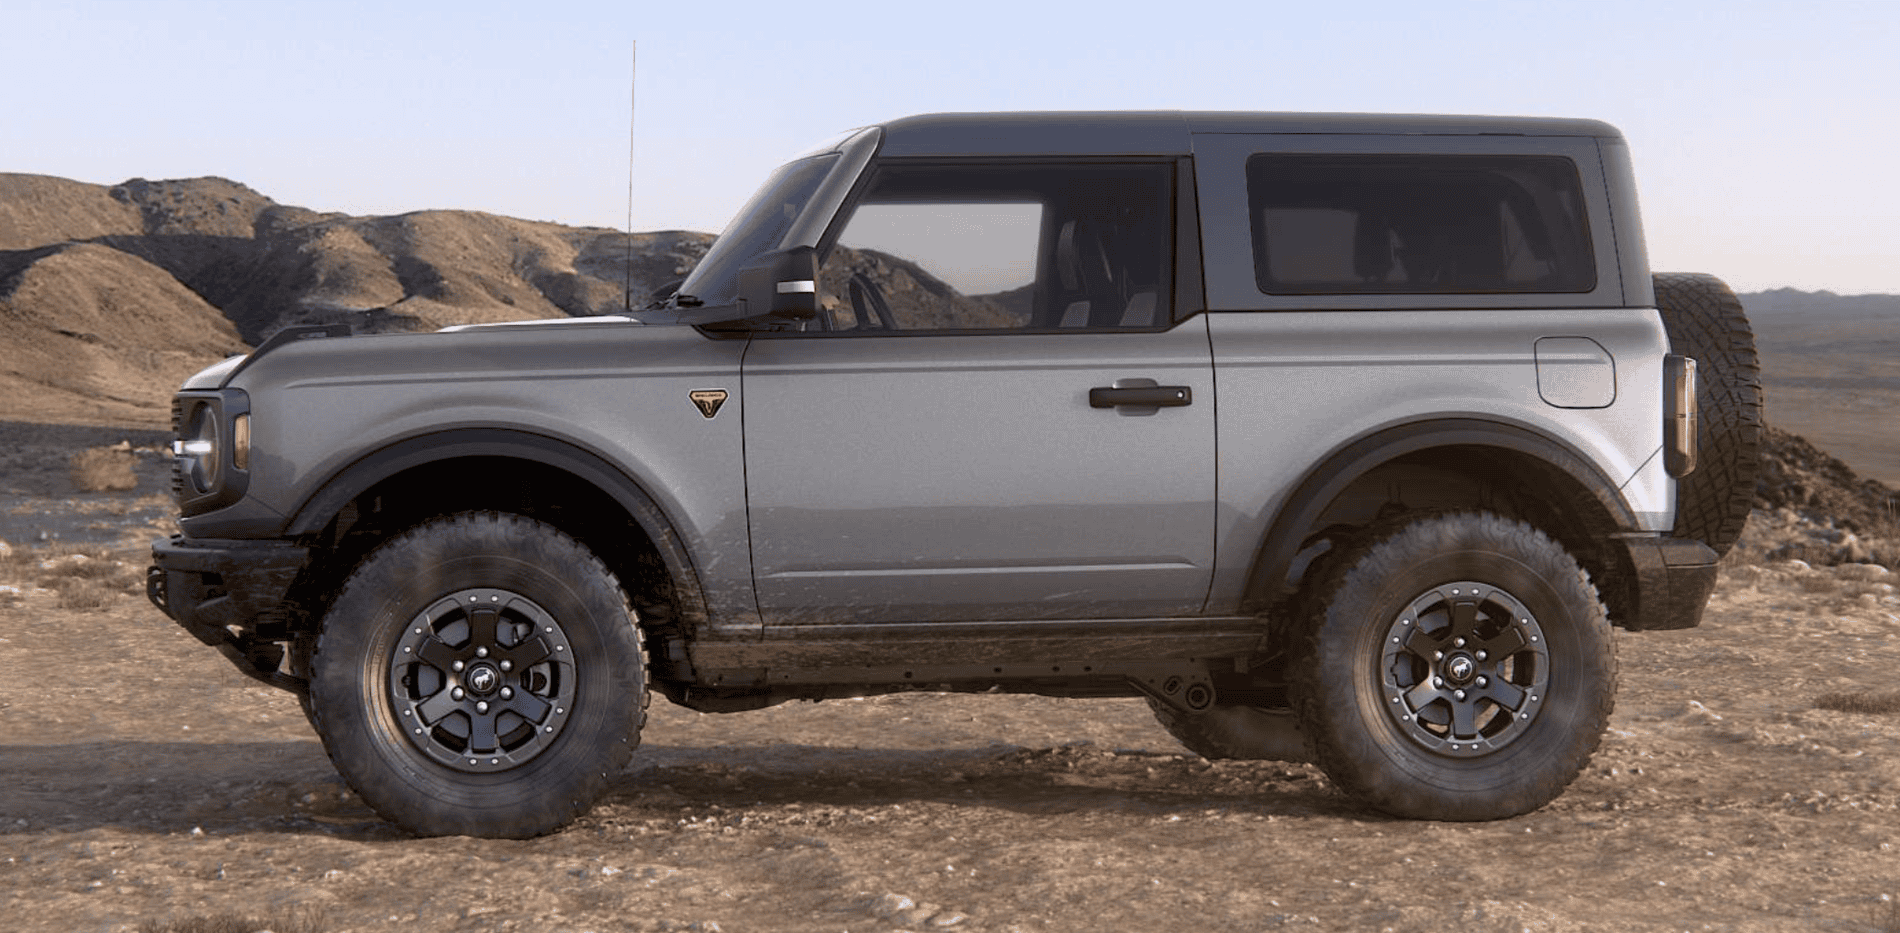 Ford Bronco Anyone Changing Color Due to MIC Top Announcement? Screen Shot 2020-10-22 at 5.44.05 PM